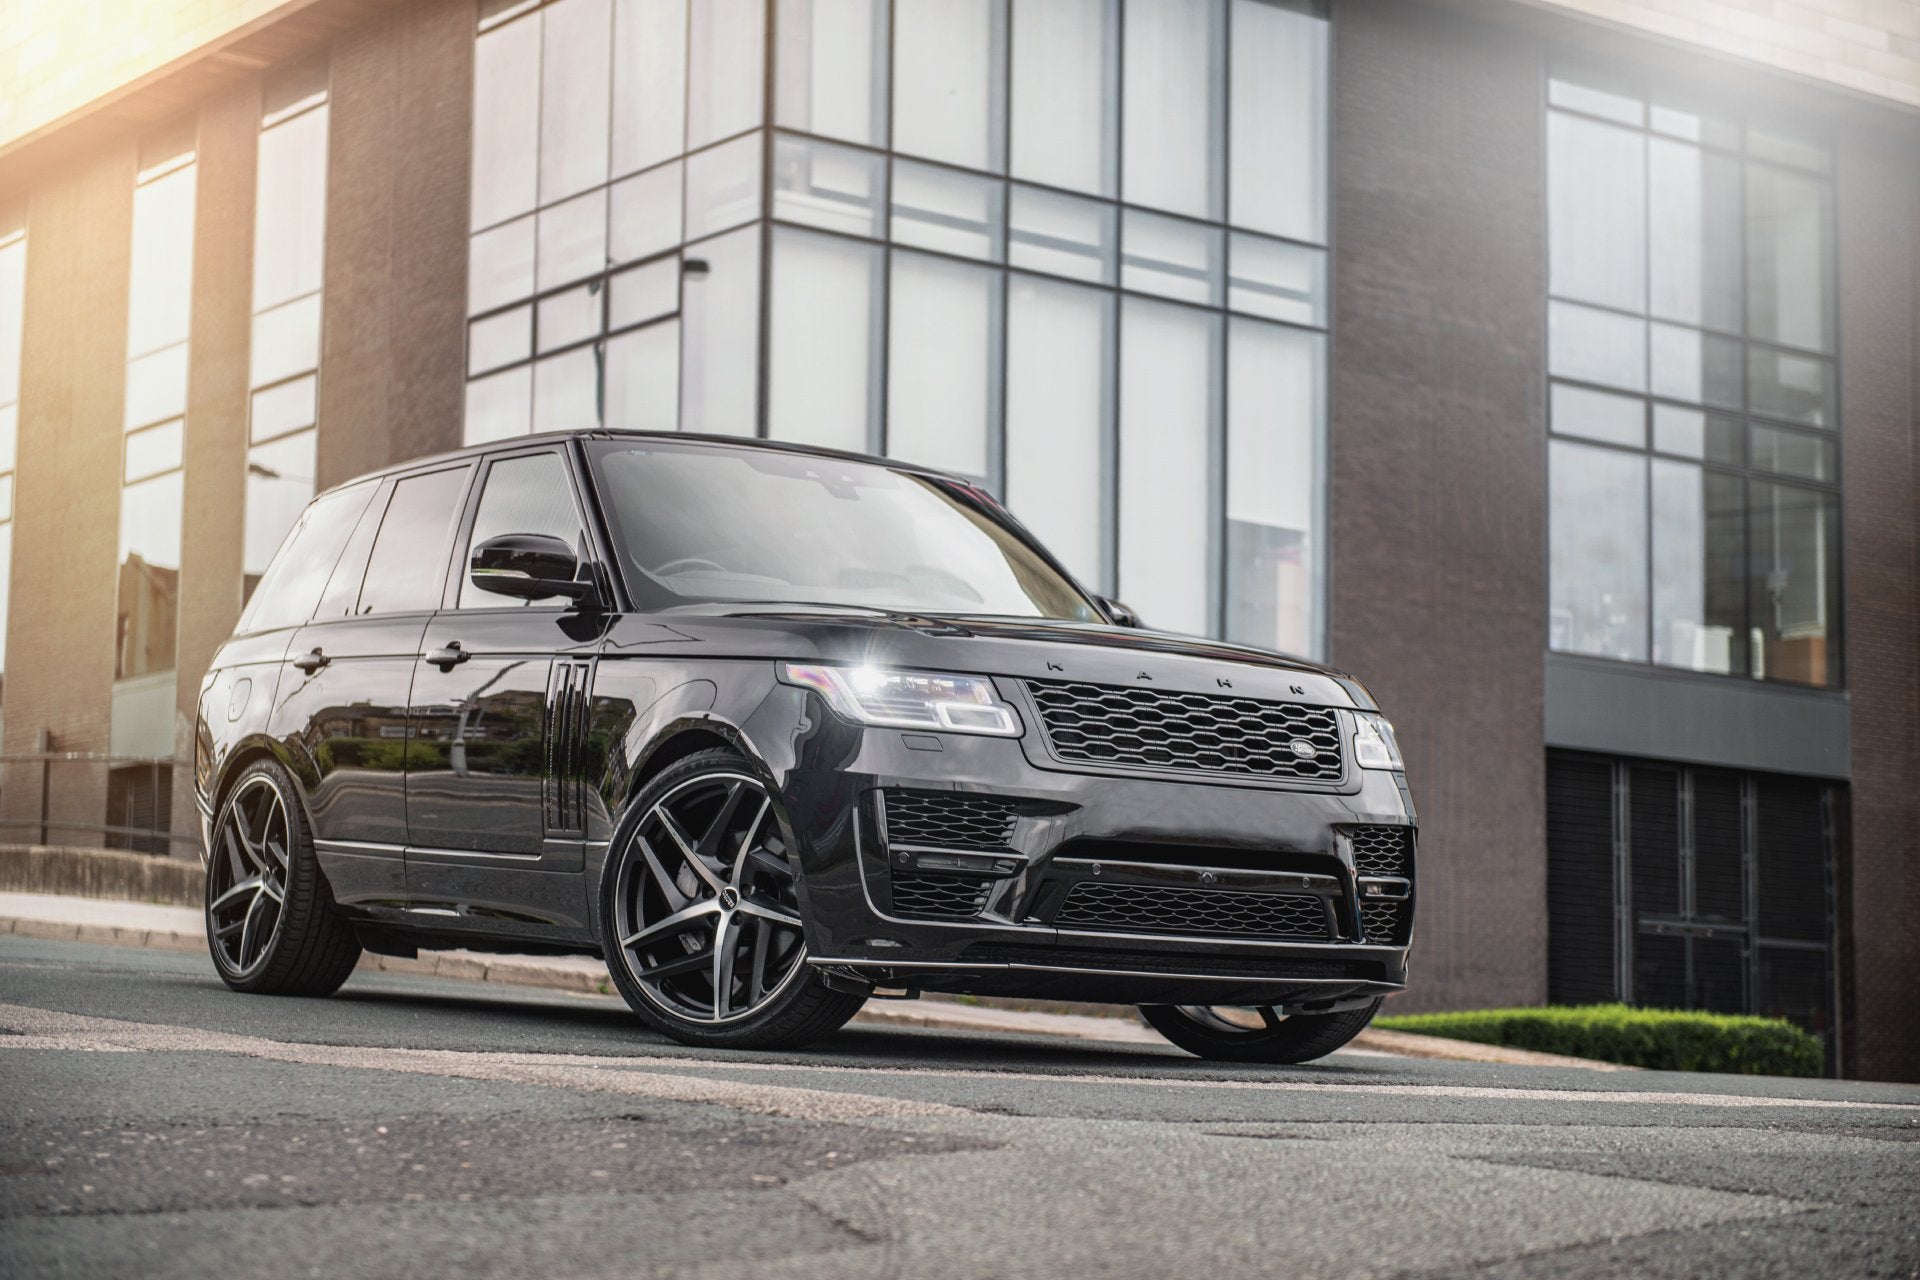 Range Rover (2018-PRESENT) Type 52 RS-Forged Alloy Wheels - Project Kahn